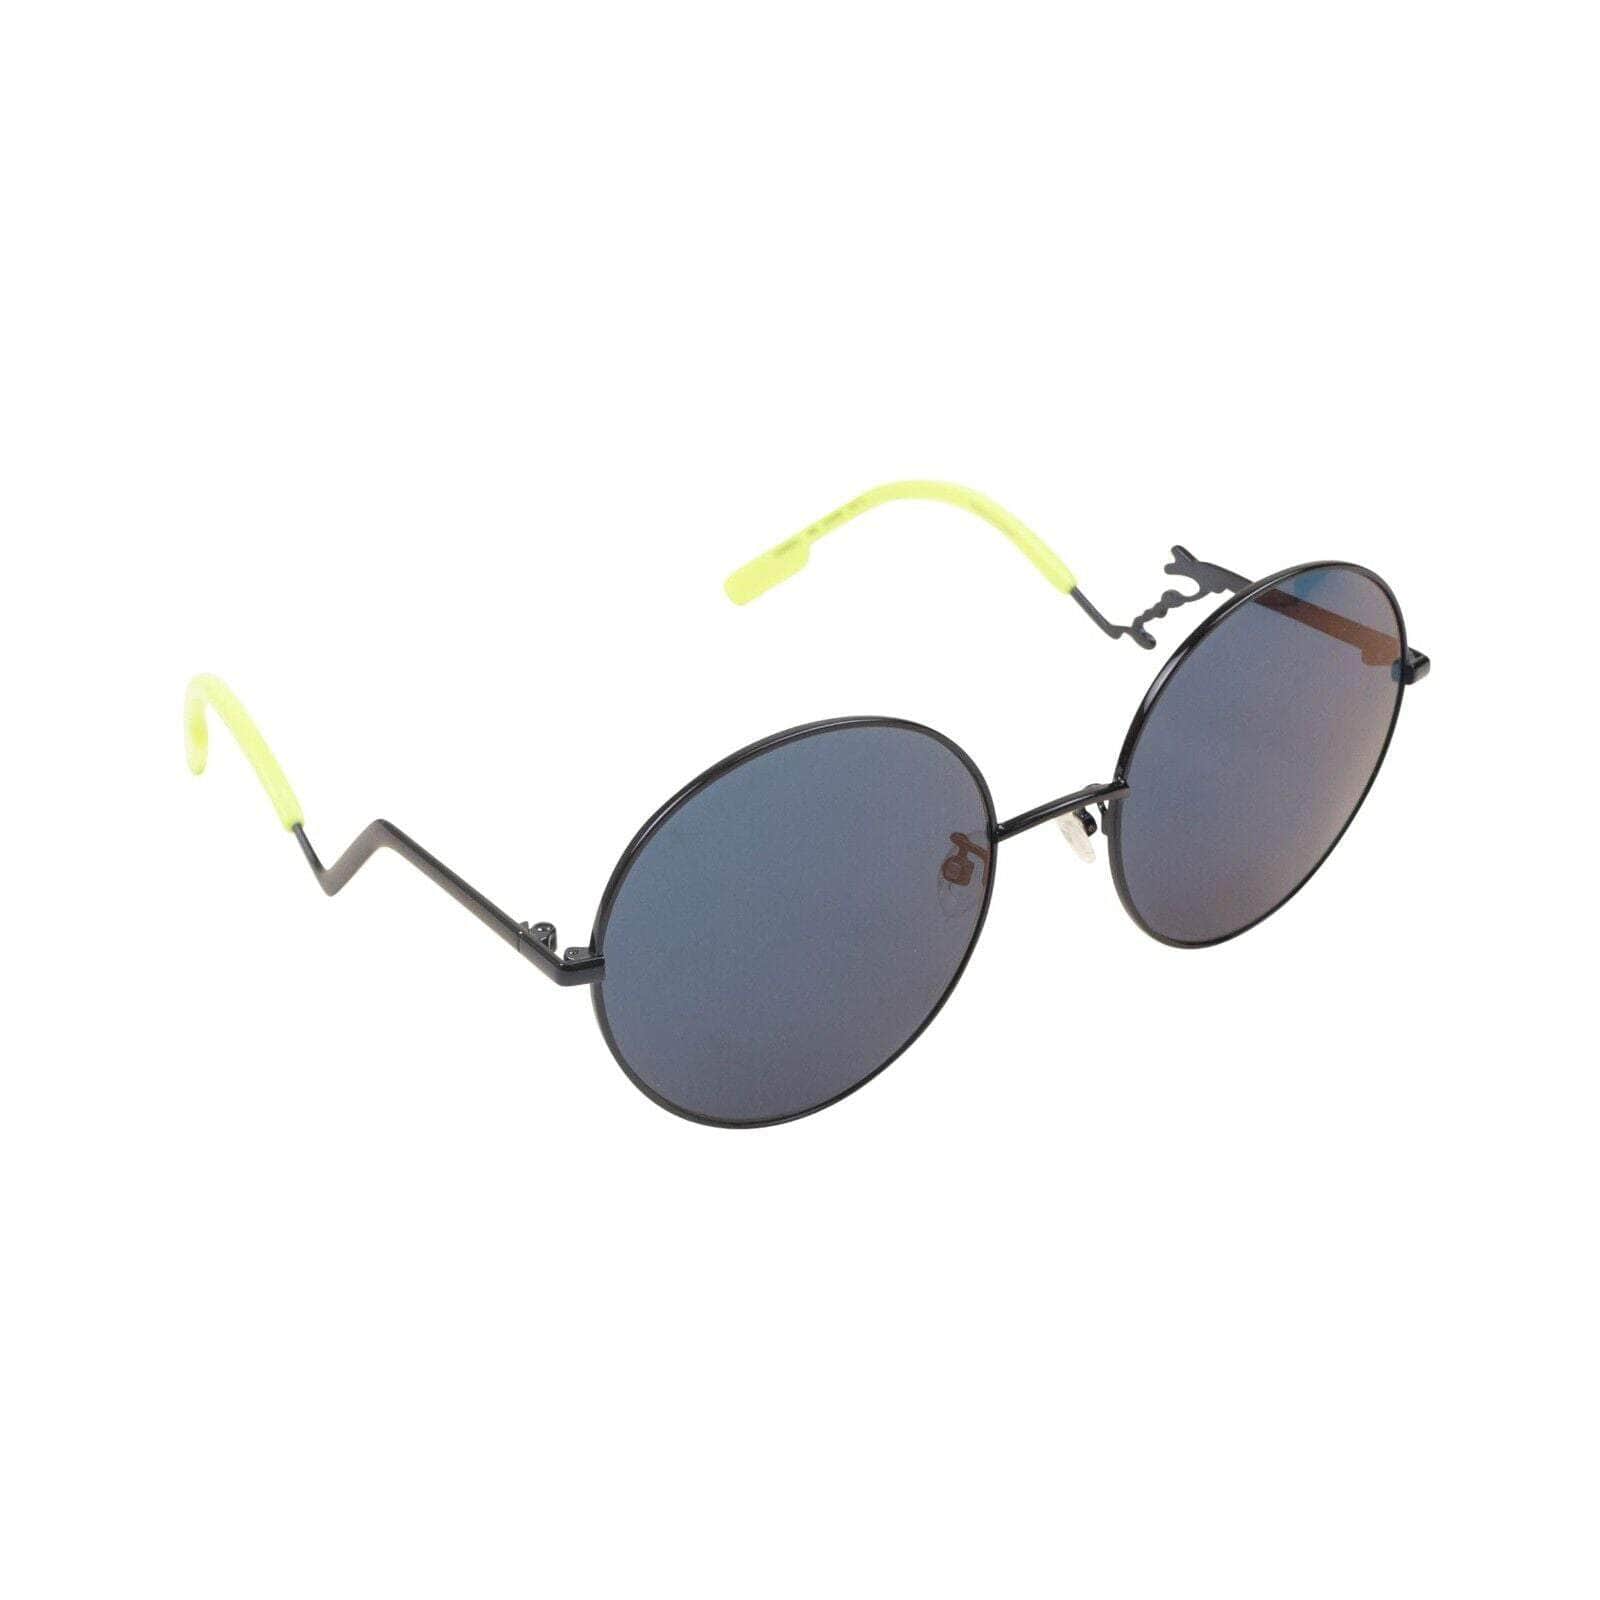 Kenzo Paris channelenable-all, chicmi, couponcollection, gender-mens, gender-womens, kenzo-paris, main-accessories, mens-shoes, size-os, under-250, unisex-eyewear OS Black Mirror Neon Yellow Circle Wire Sunglasses 95-KNZ-3027/OS 95-KNZ-3027/OS